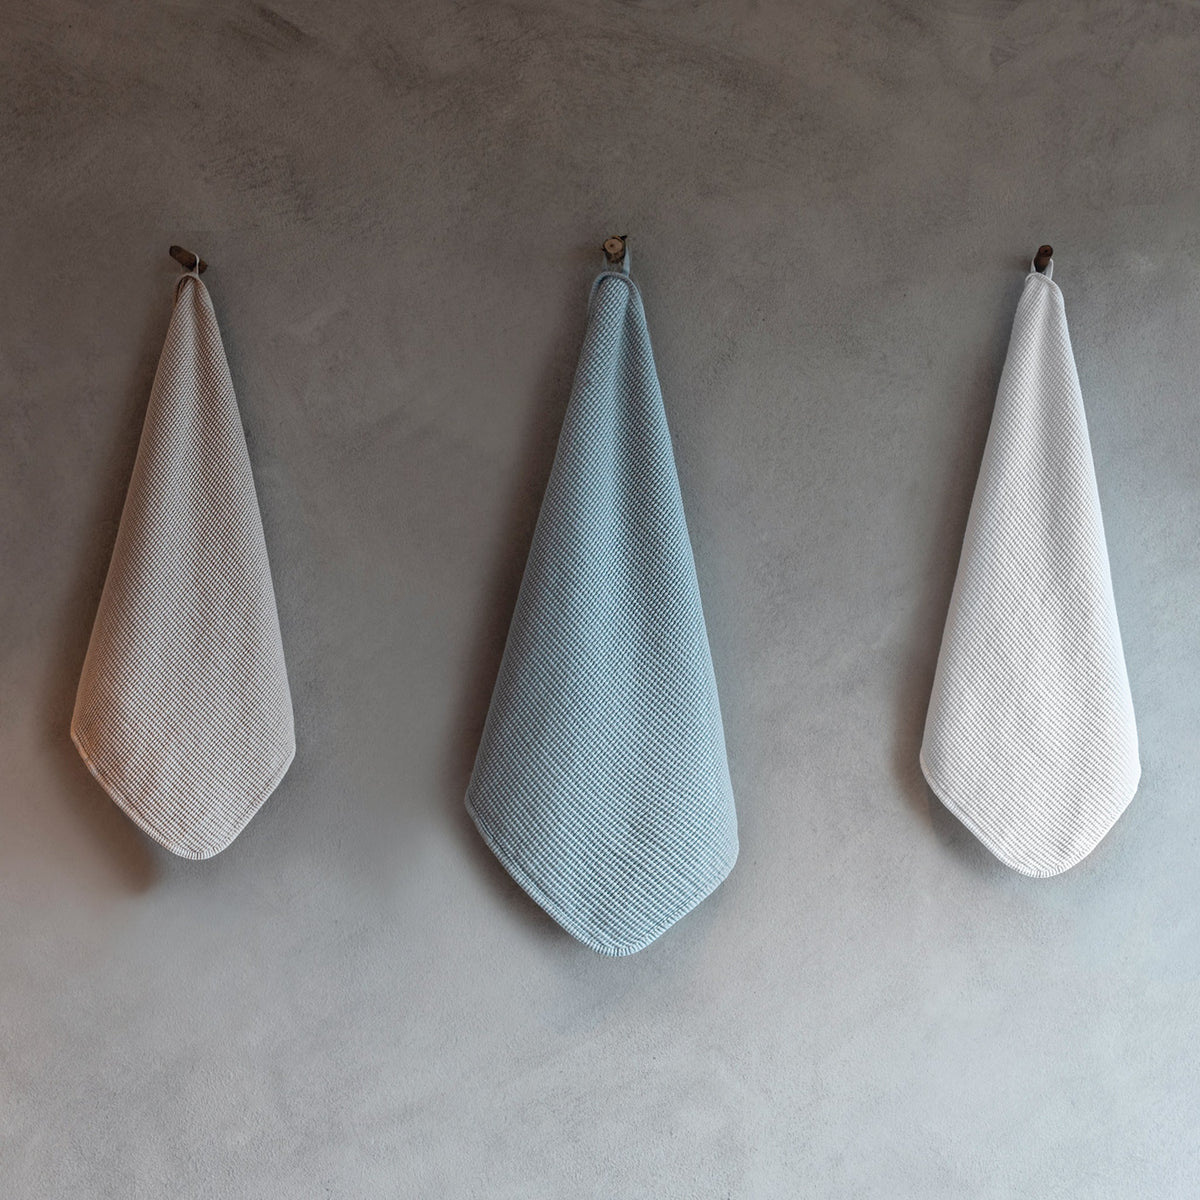 Hanging Graccioza Melody Bath Linens in Different Colors